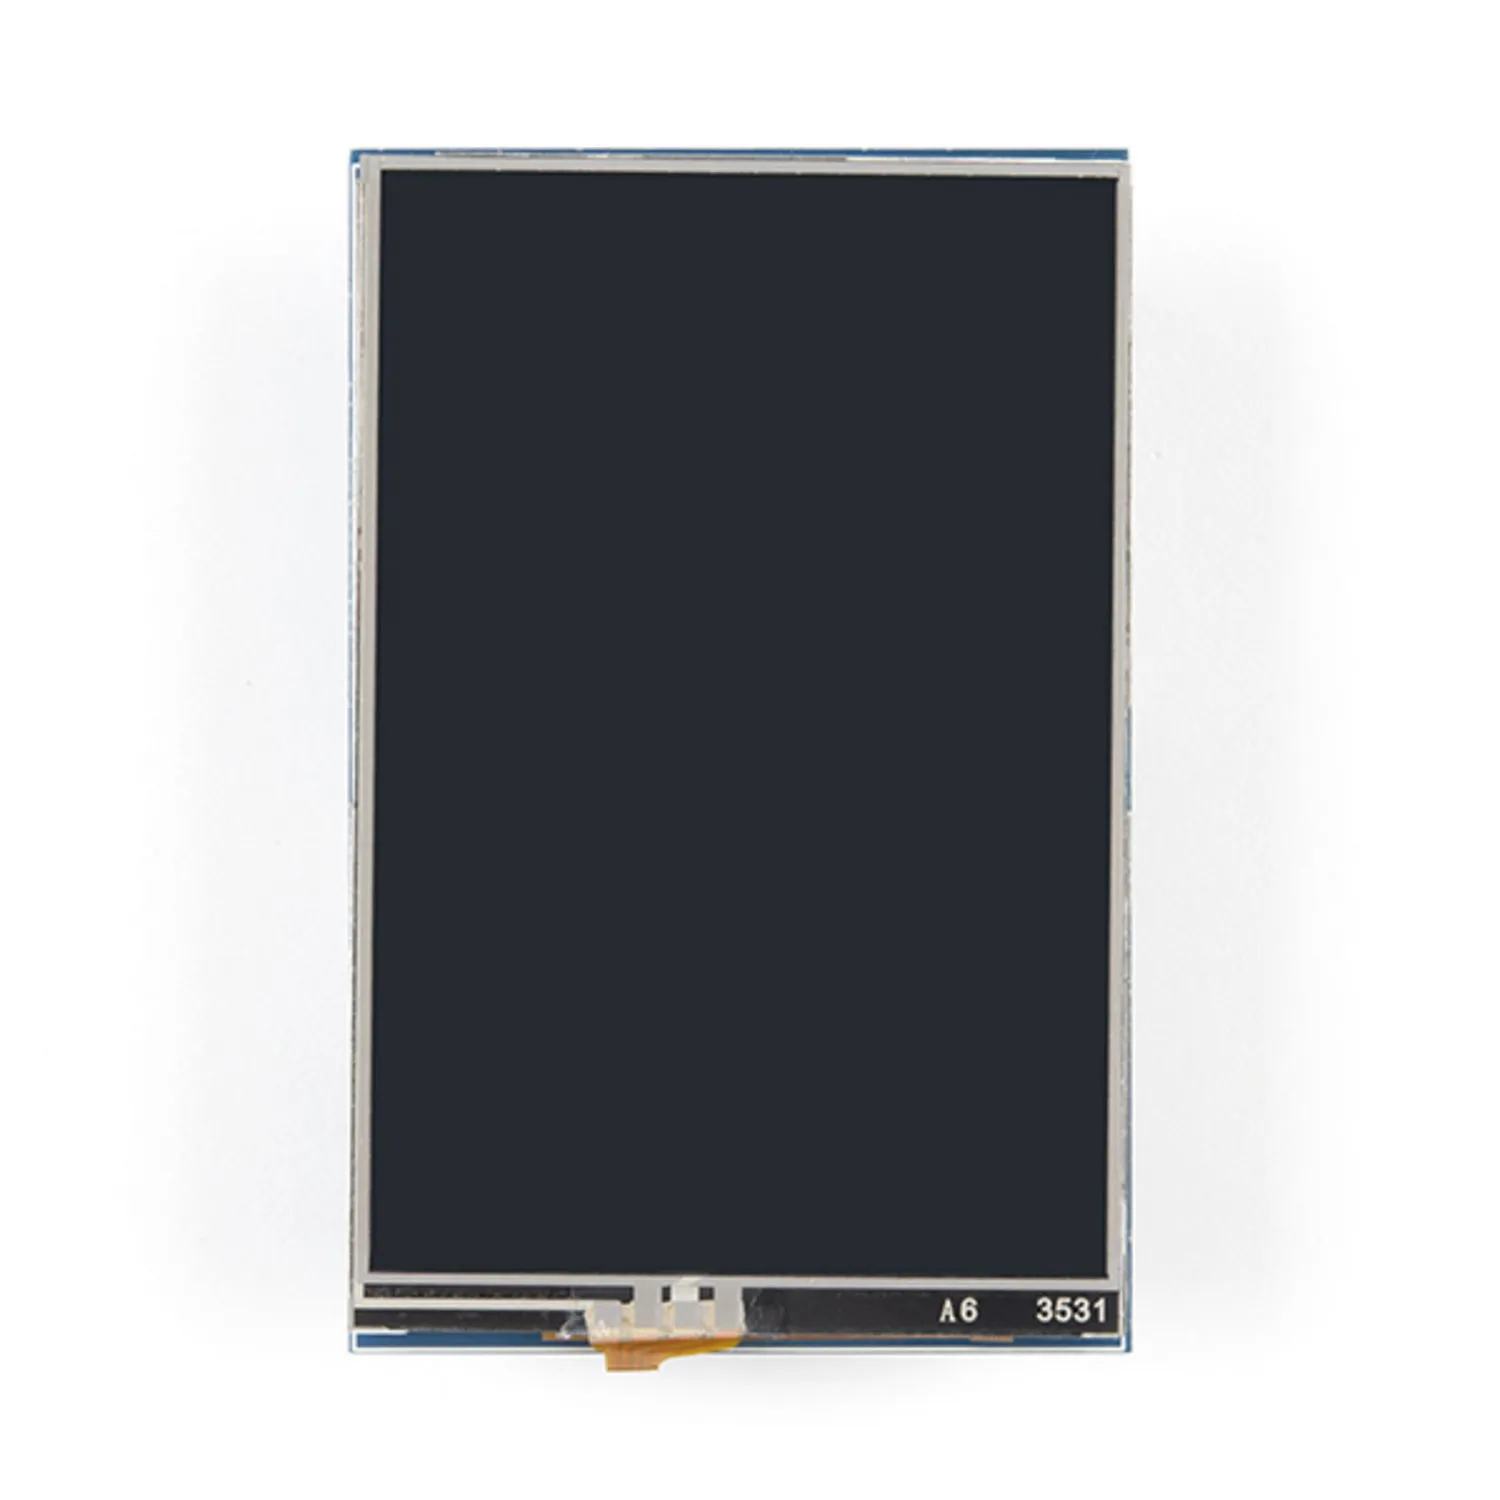 Photo of LCD Touchscreen HAT for Raspberry Pi - TFT 3.5in. (480x320)